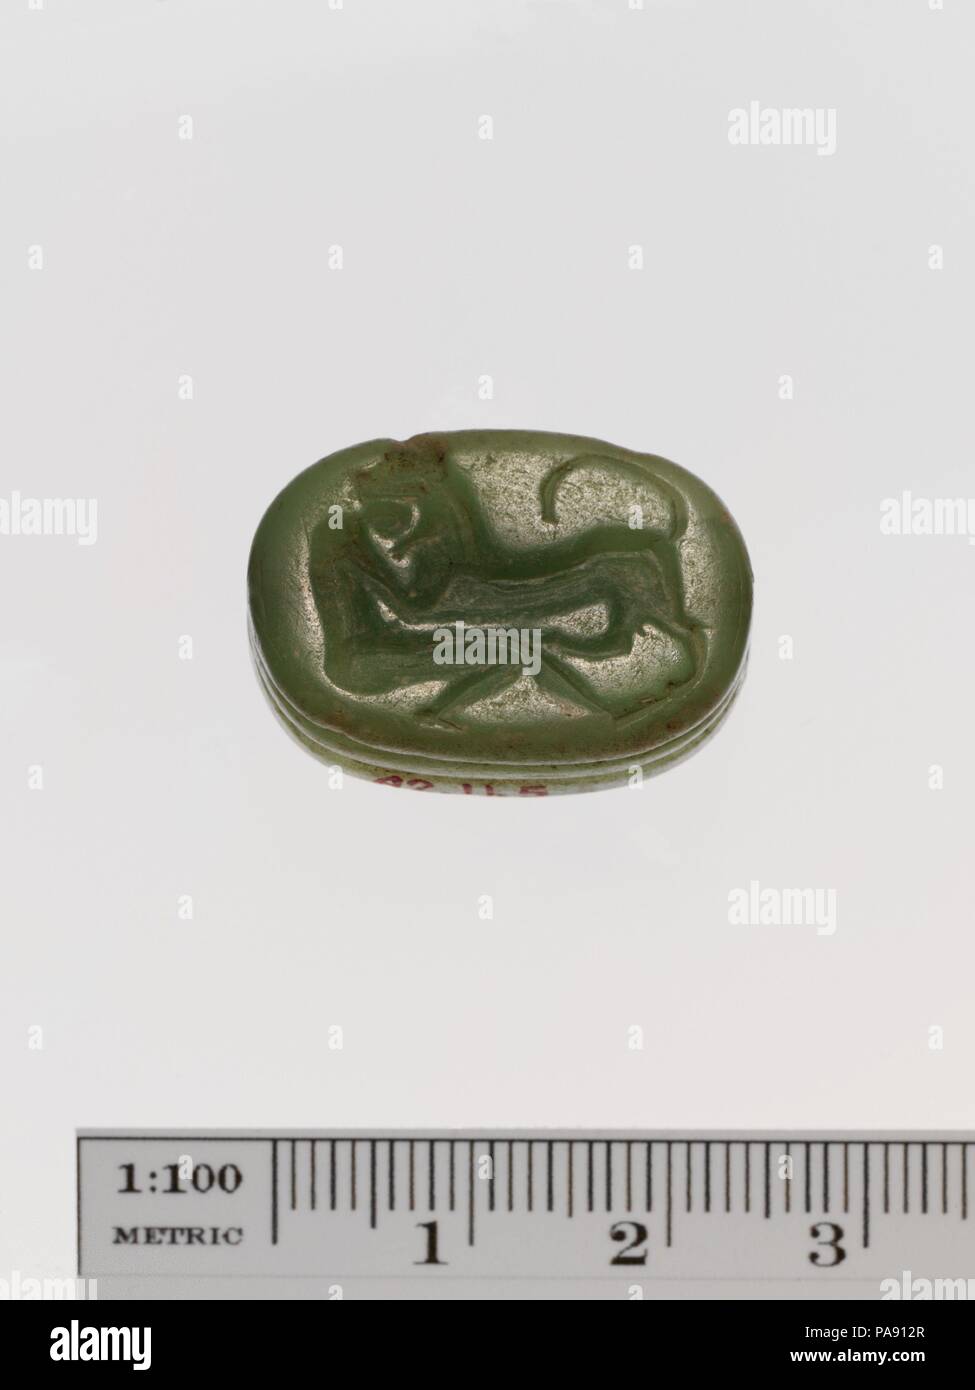 Steatite scaraboid seal. Culture: Greek. Dimensions: L. 2.5 cm. Date: early 7th century B.C..  Lion attacking man. The man's head is inside the jaws of the animal. Museum: Metropolitan Museum of Art, New York, USA. Stock Photo